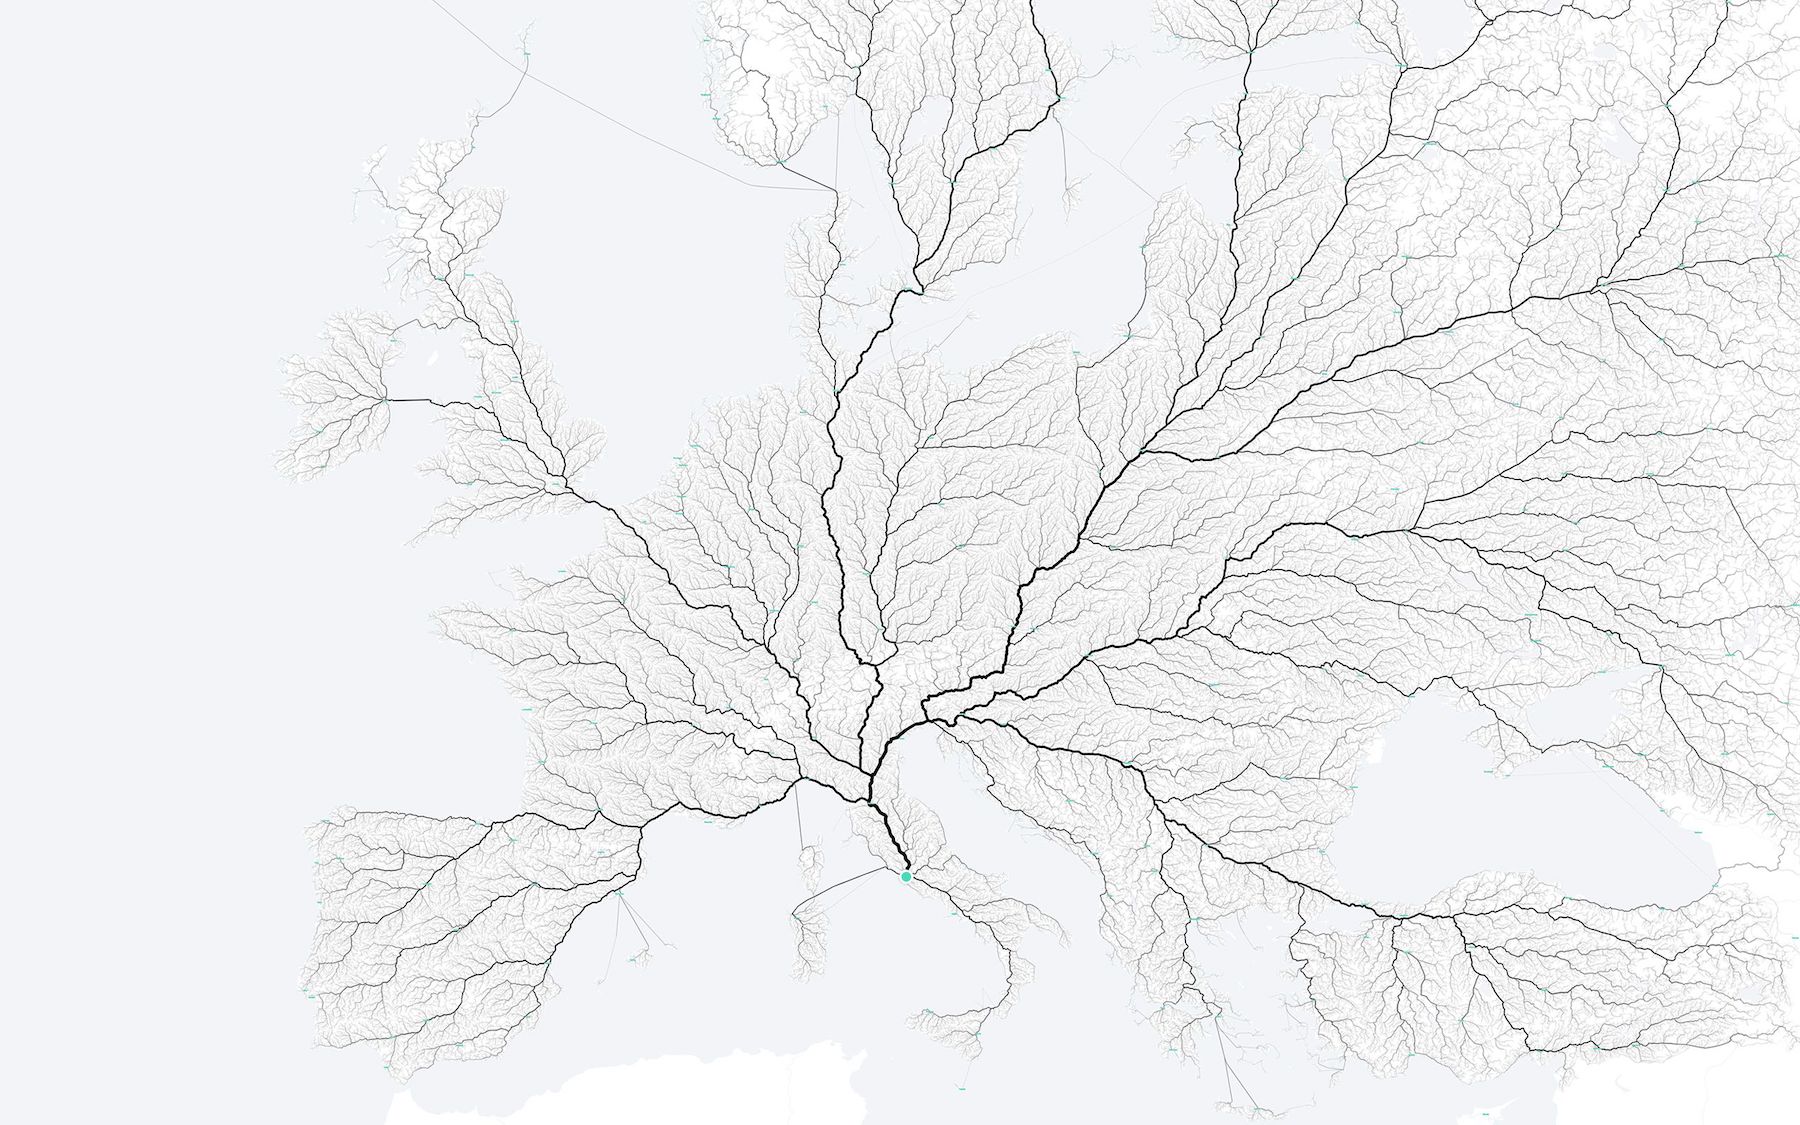 The moovellab's visualization of all roads leading to Rome